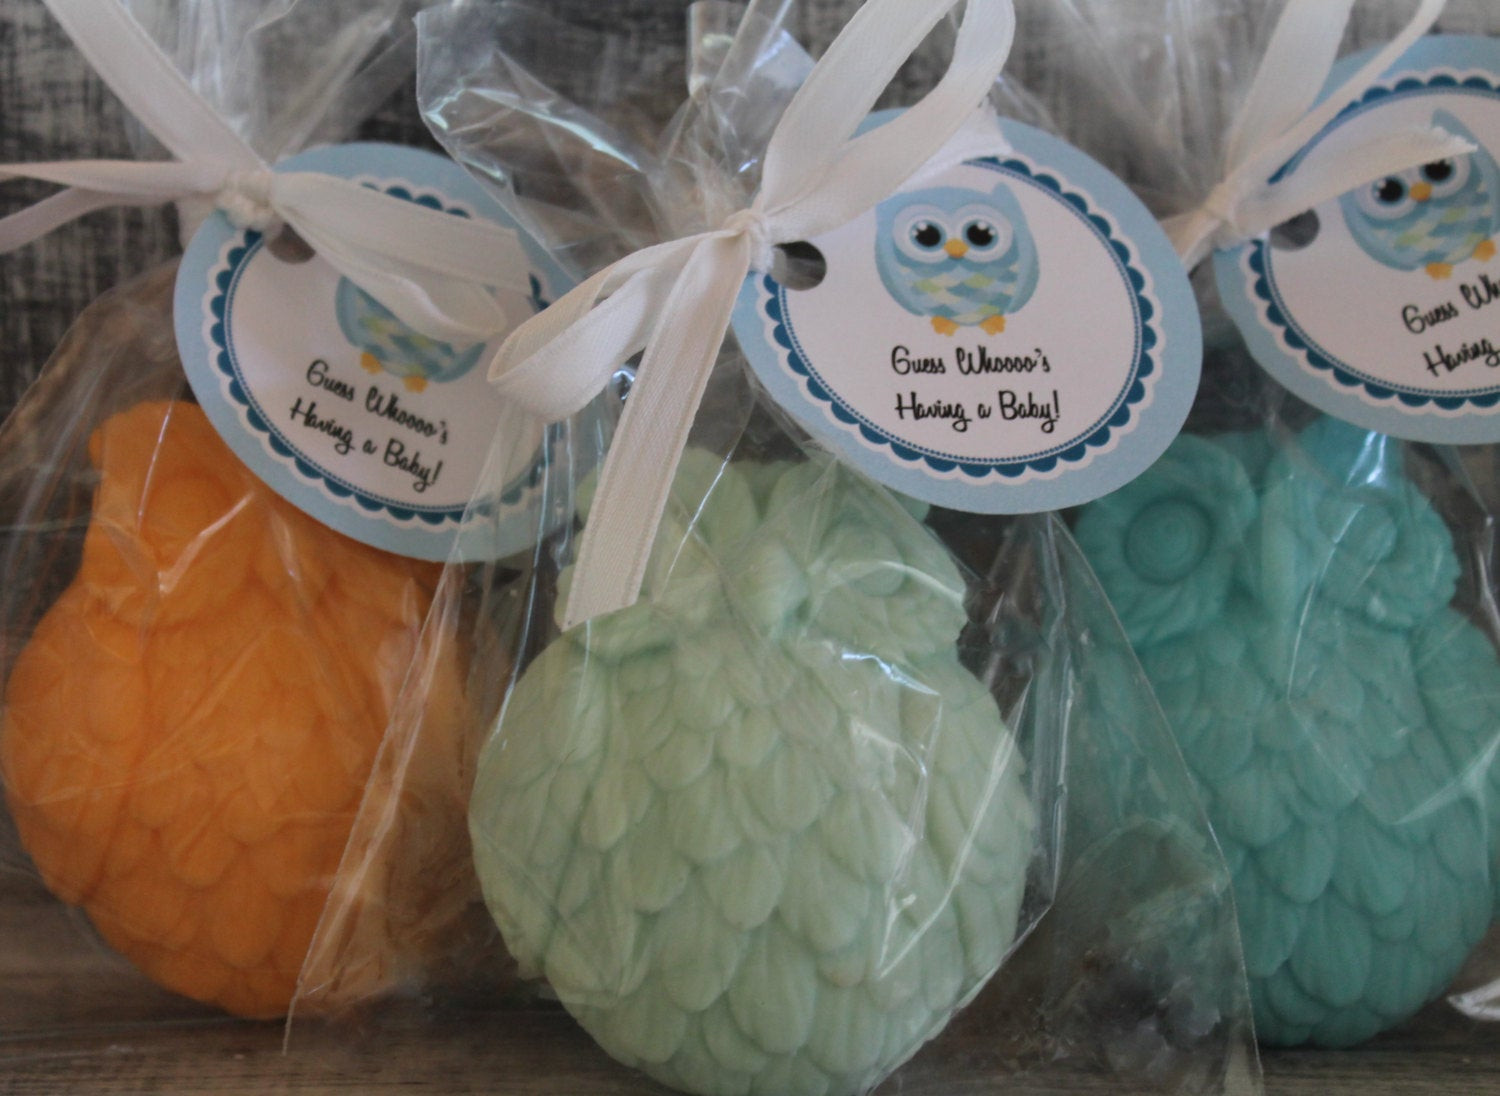 Owl Party Favors For Baby Shower
 10 Owl Party Favor Soaps Baby Shower Birthday favors